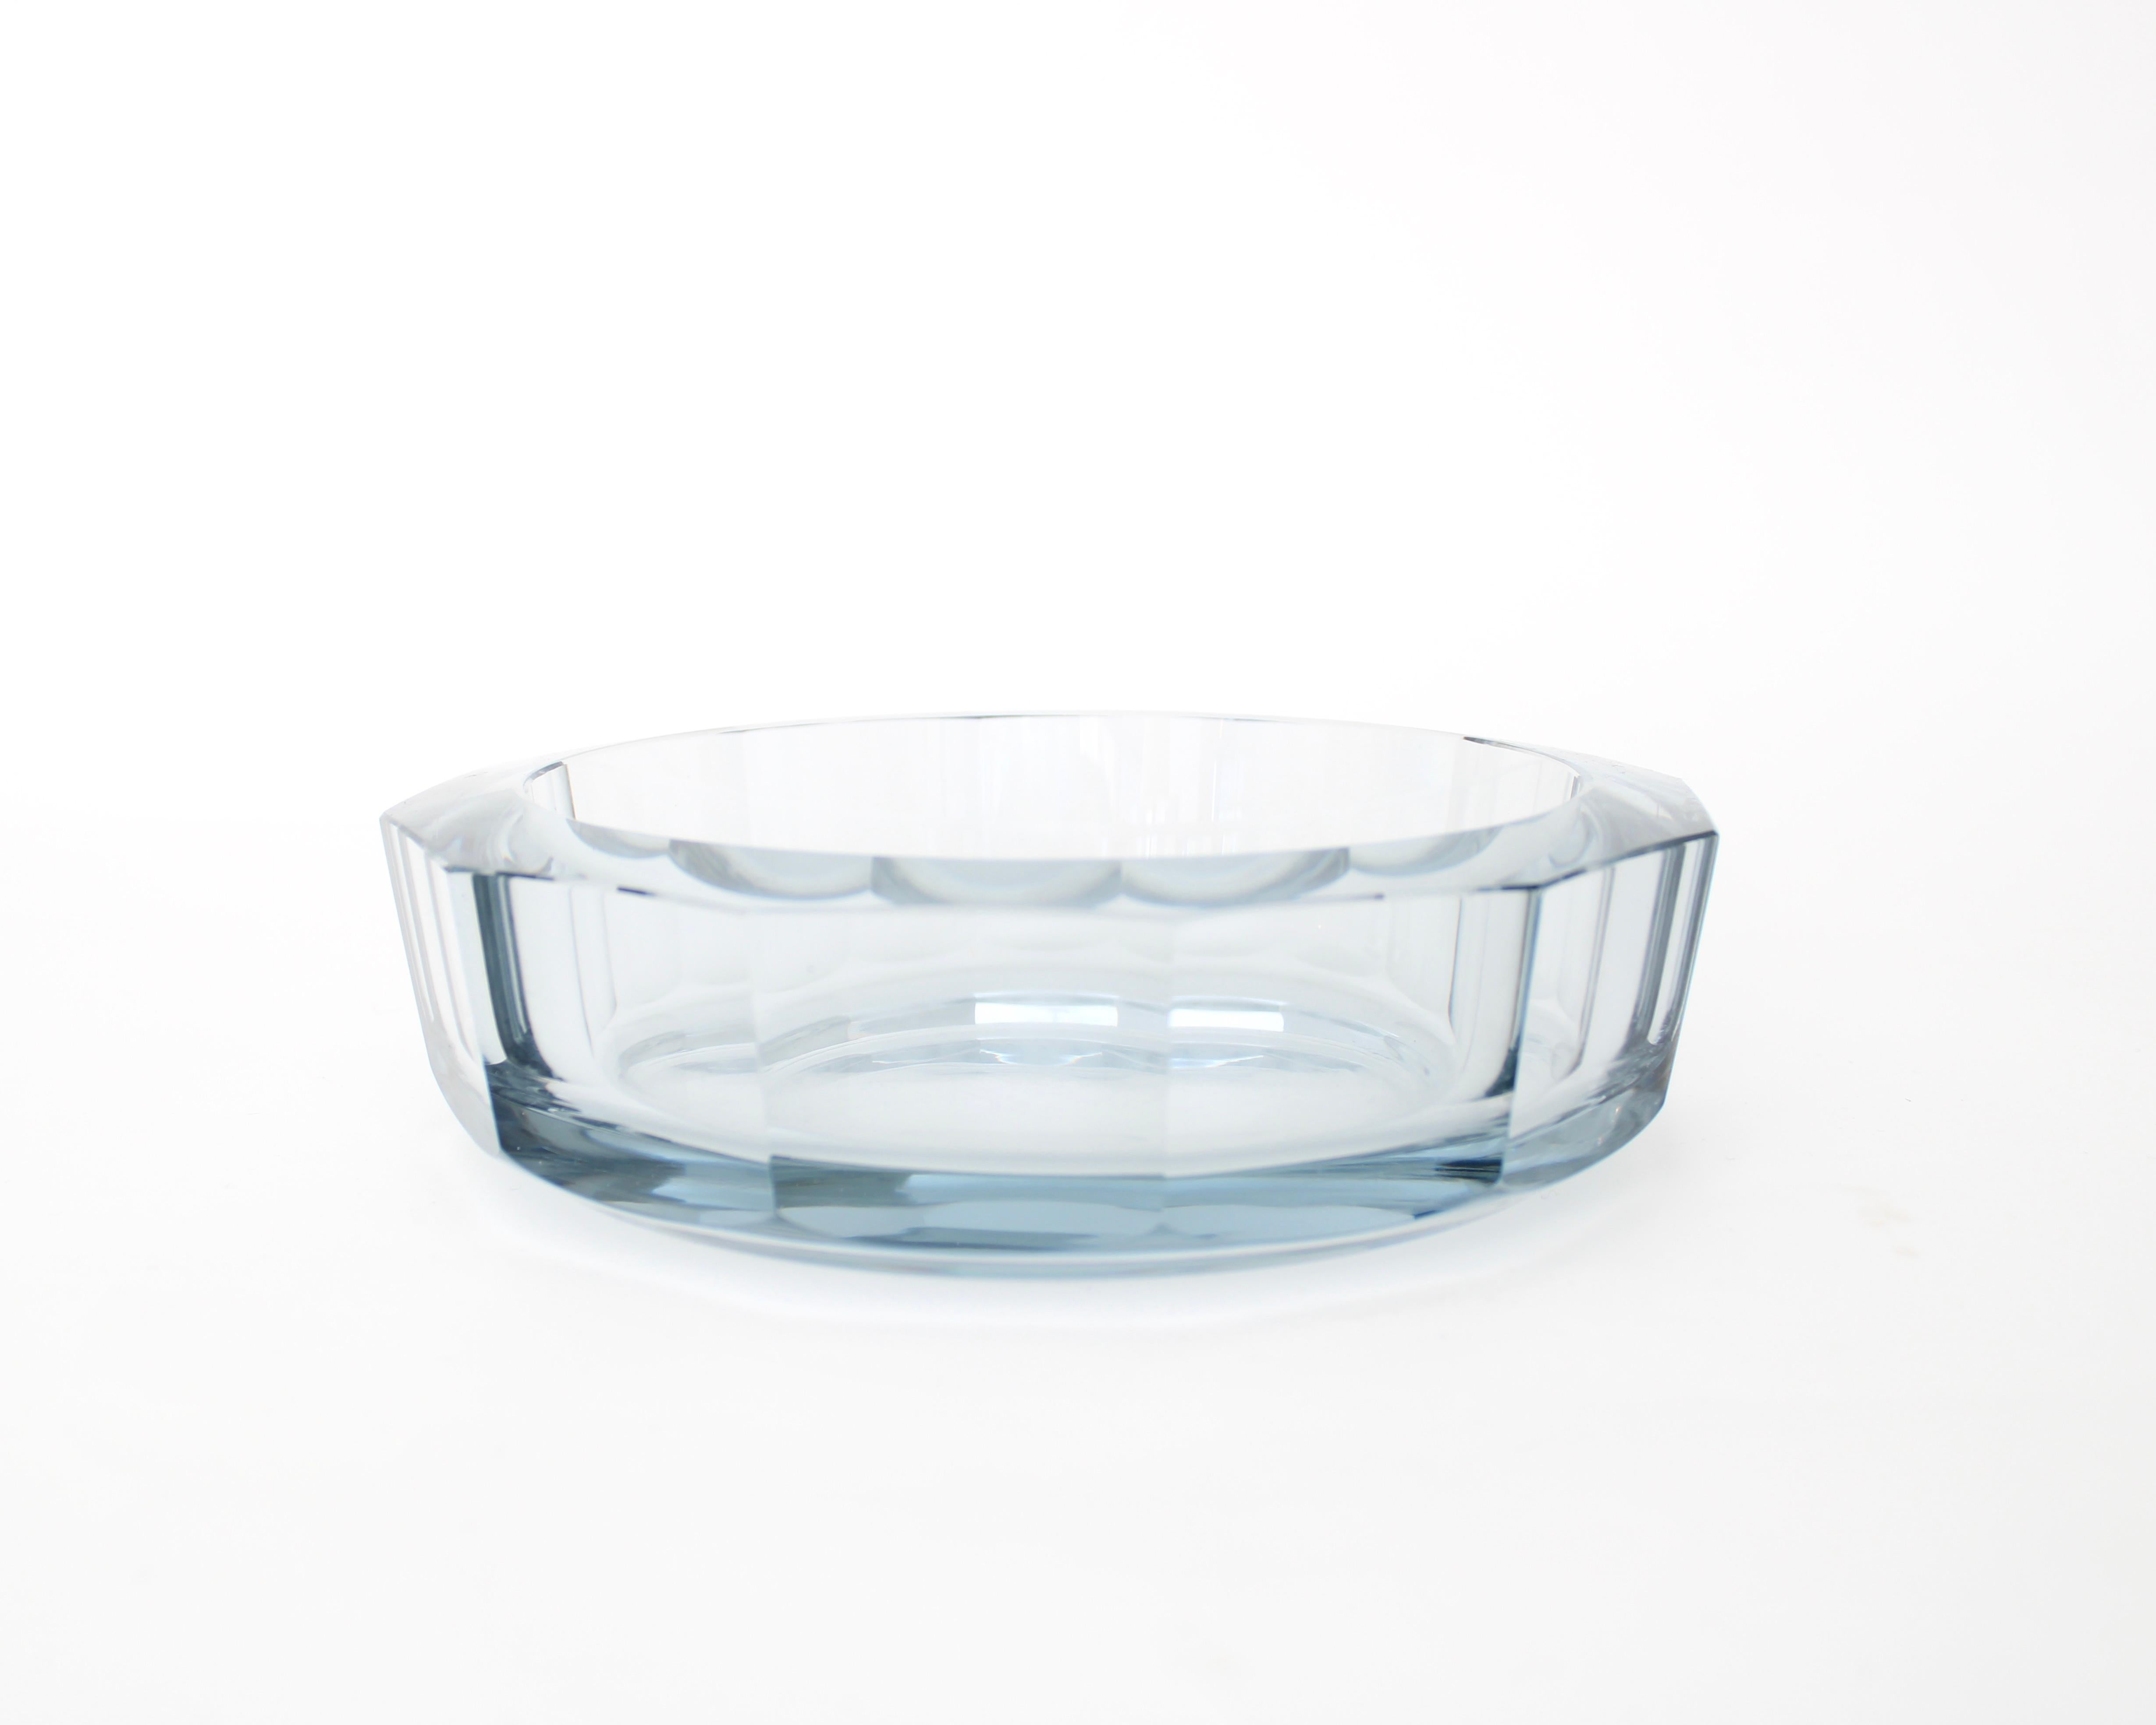 Diamond cut glass dish Designed by Asta Strömberg. Manufactured by Strömbergshyttan in Sweden during the 1950s. Engraved on bottom Stromberg and numbered.
Slightly colored with blue.
Excellent condition with no chips or flaws.